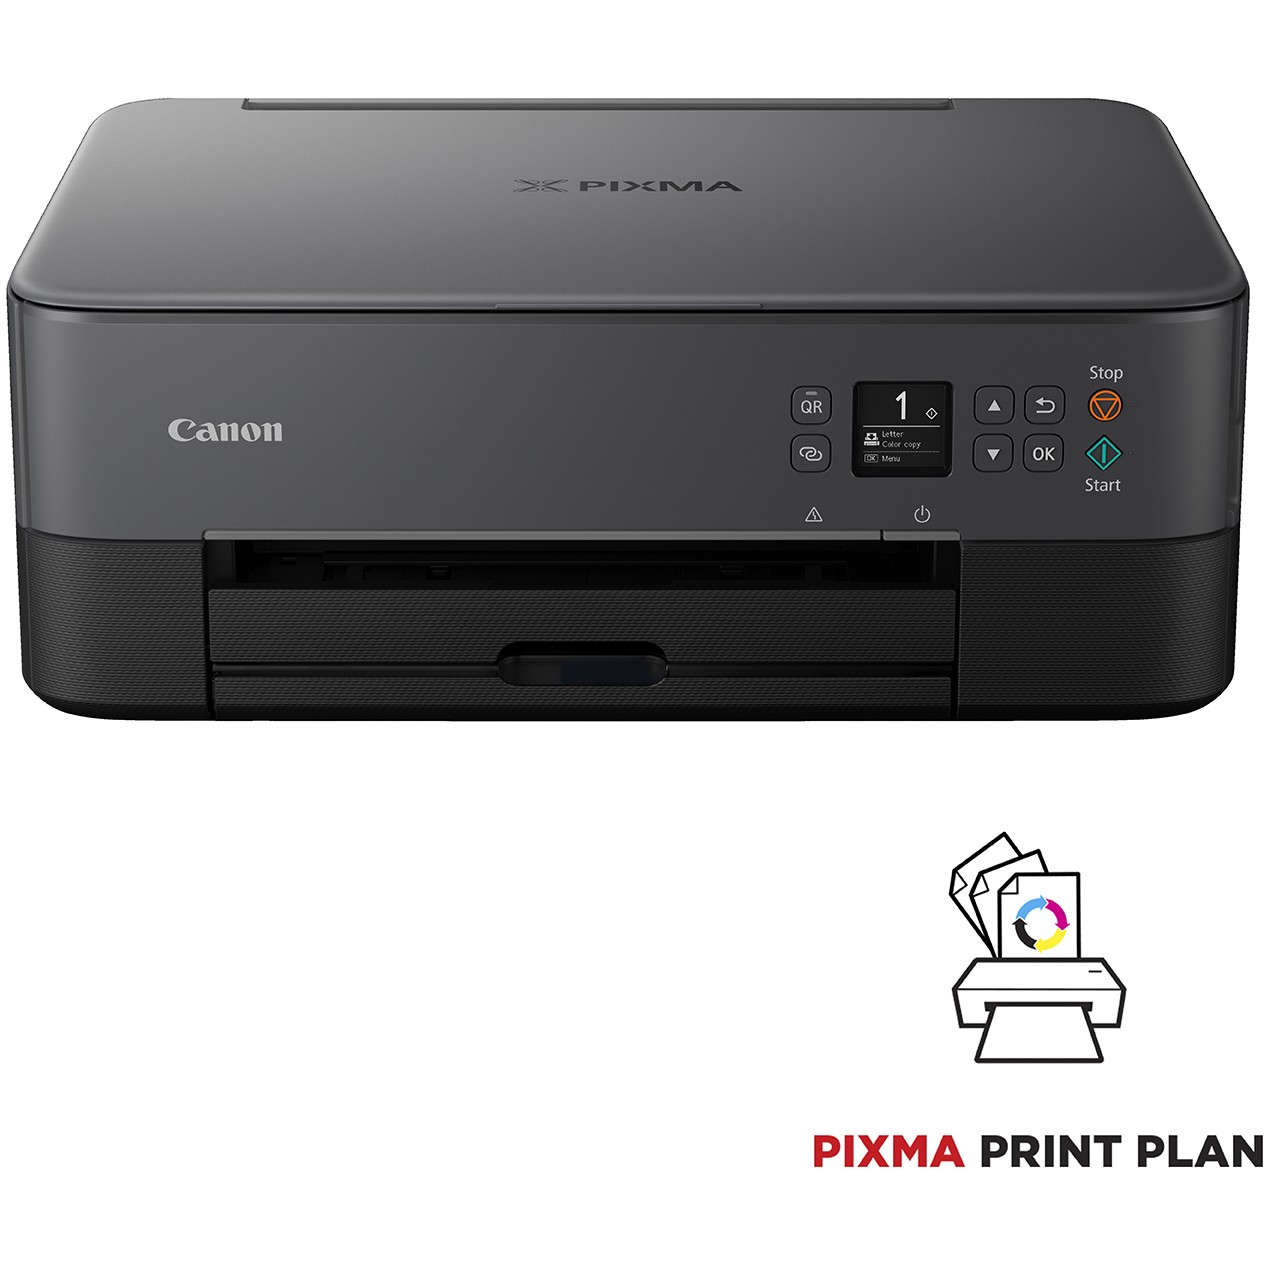 T Canon PIXMA TS3550i Tinte-Multifunktionssystem 3in1 A4 WLAN